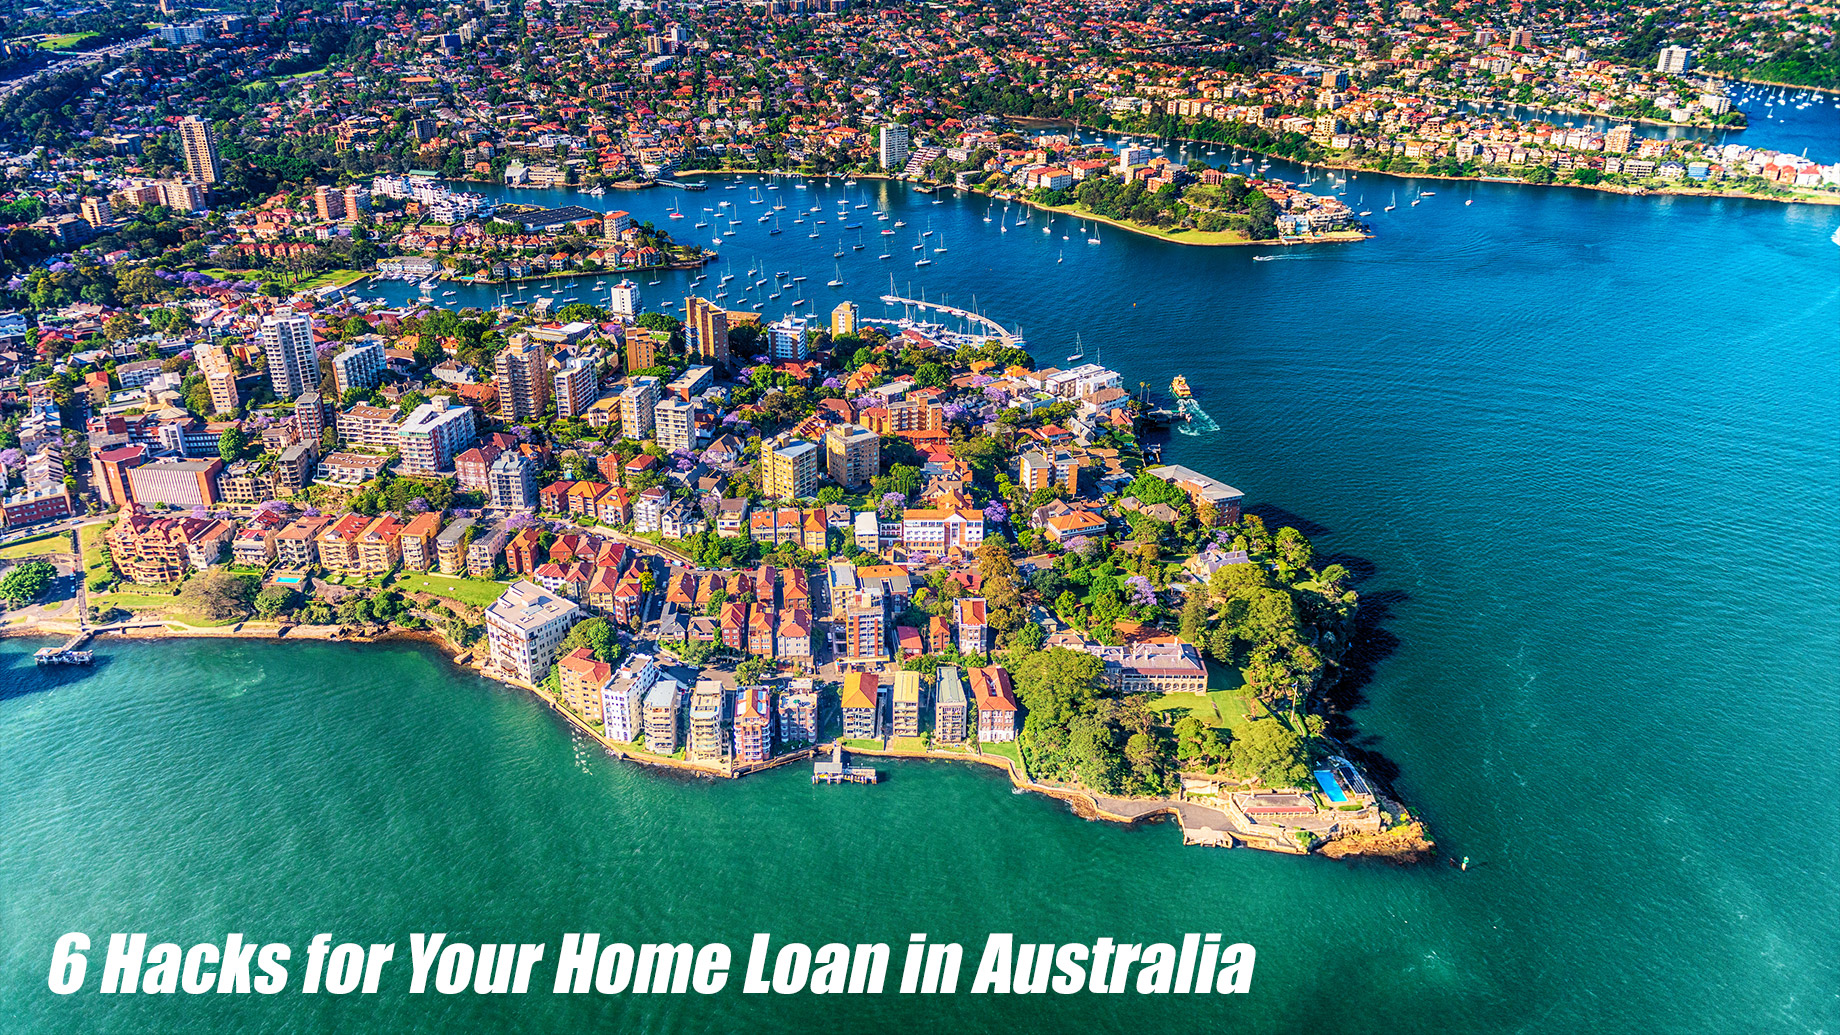 6 Hacks for Your Home Loan in Australia